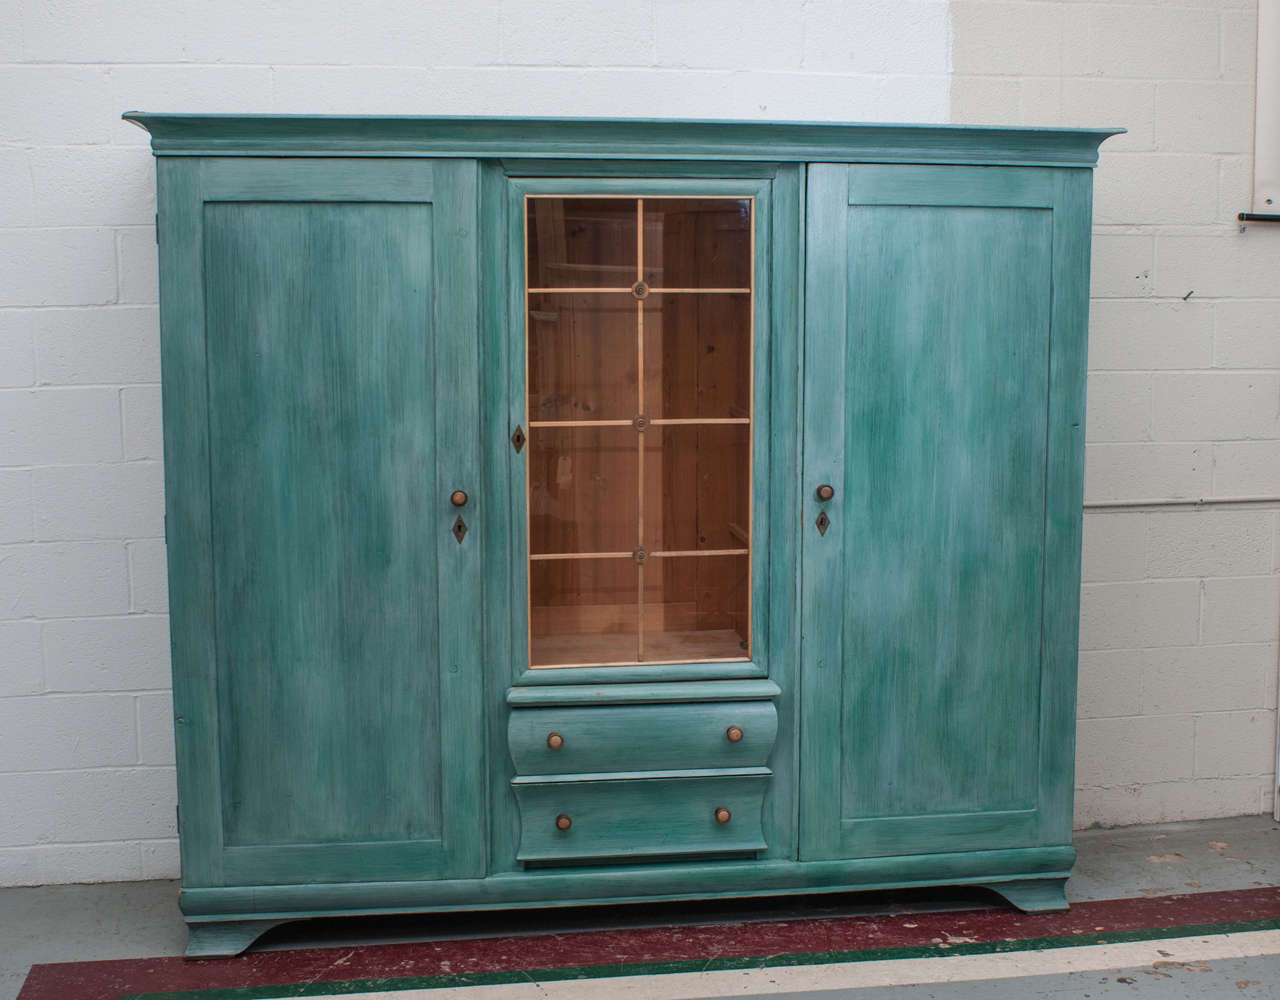 This large and unusual triple armoire offers heaps of storage.  It features a central glazed door above one convex and one concave fronted drawer, flanked by wide swinging doors revealing two wide and deep compartments for shelves or hanging poles. 